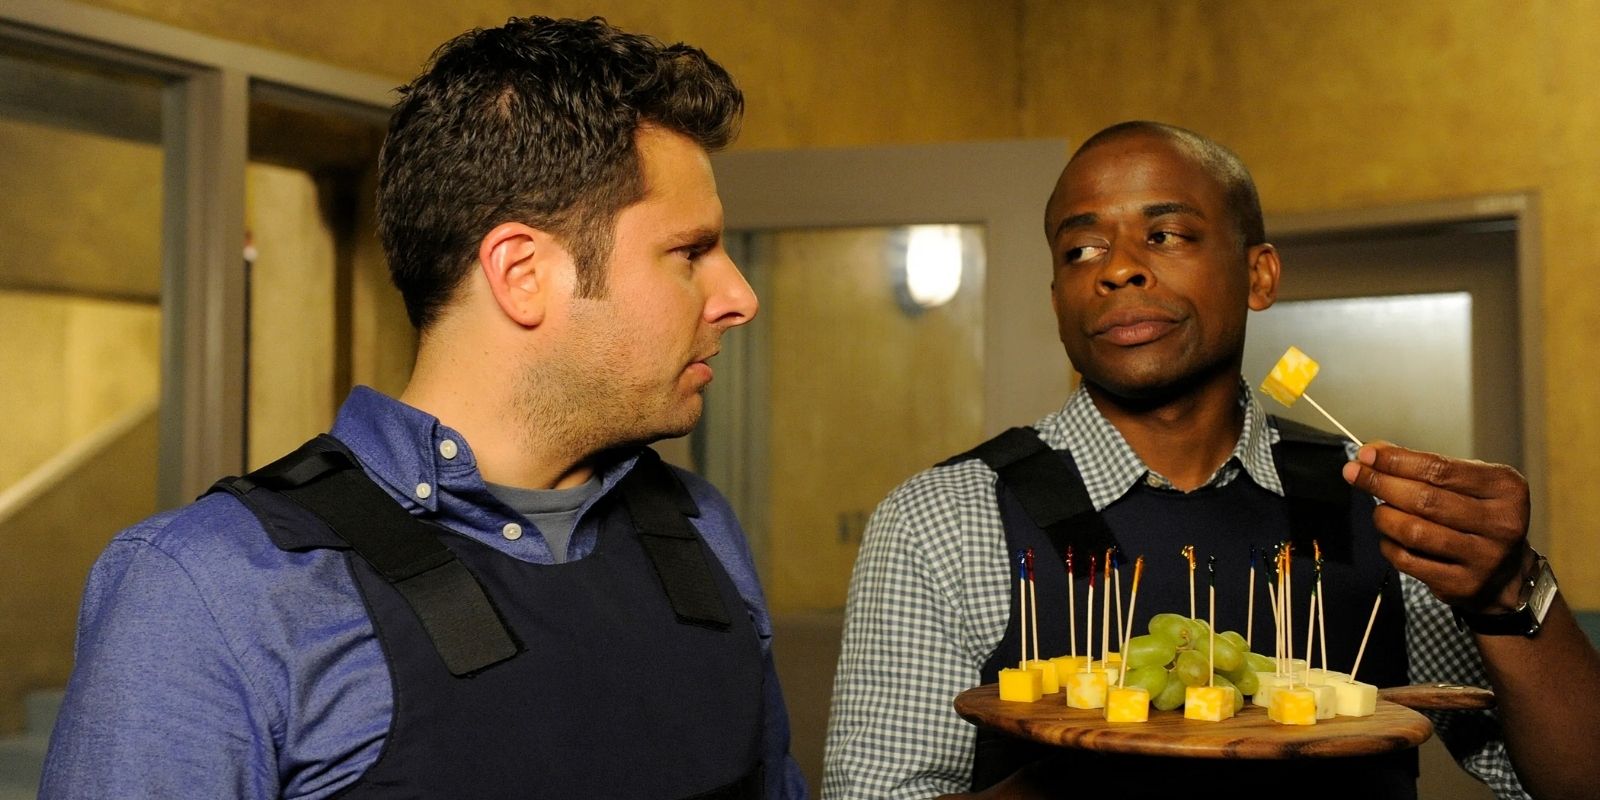 Shawn Spencer and Burton Guster hold a tray of cheese in Psych.